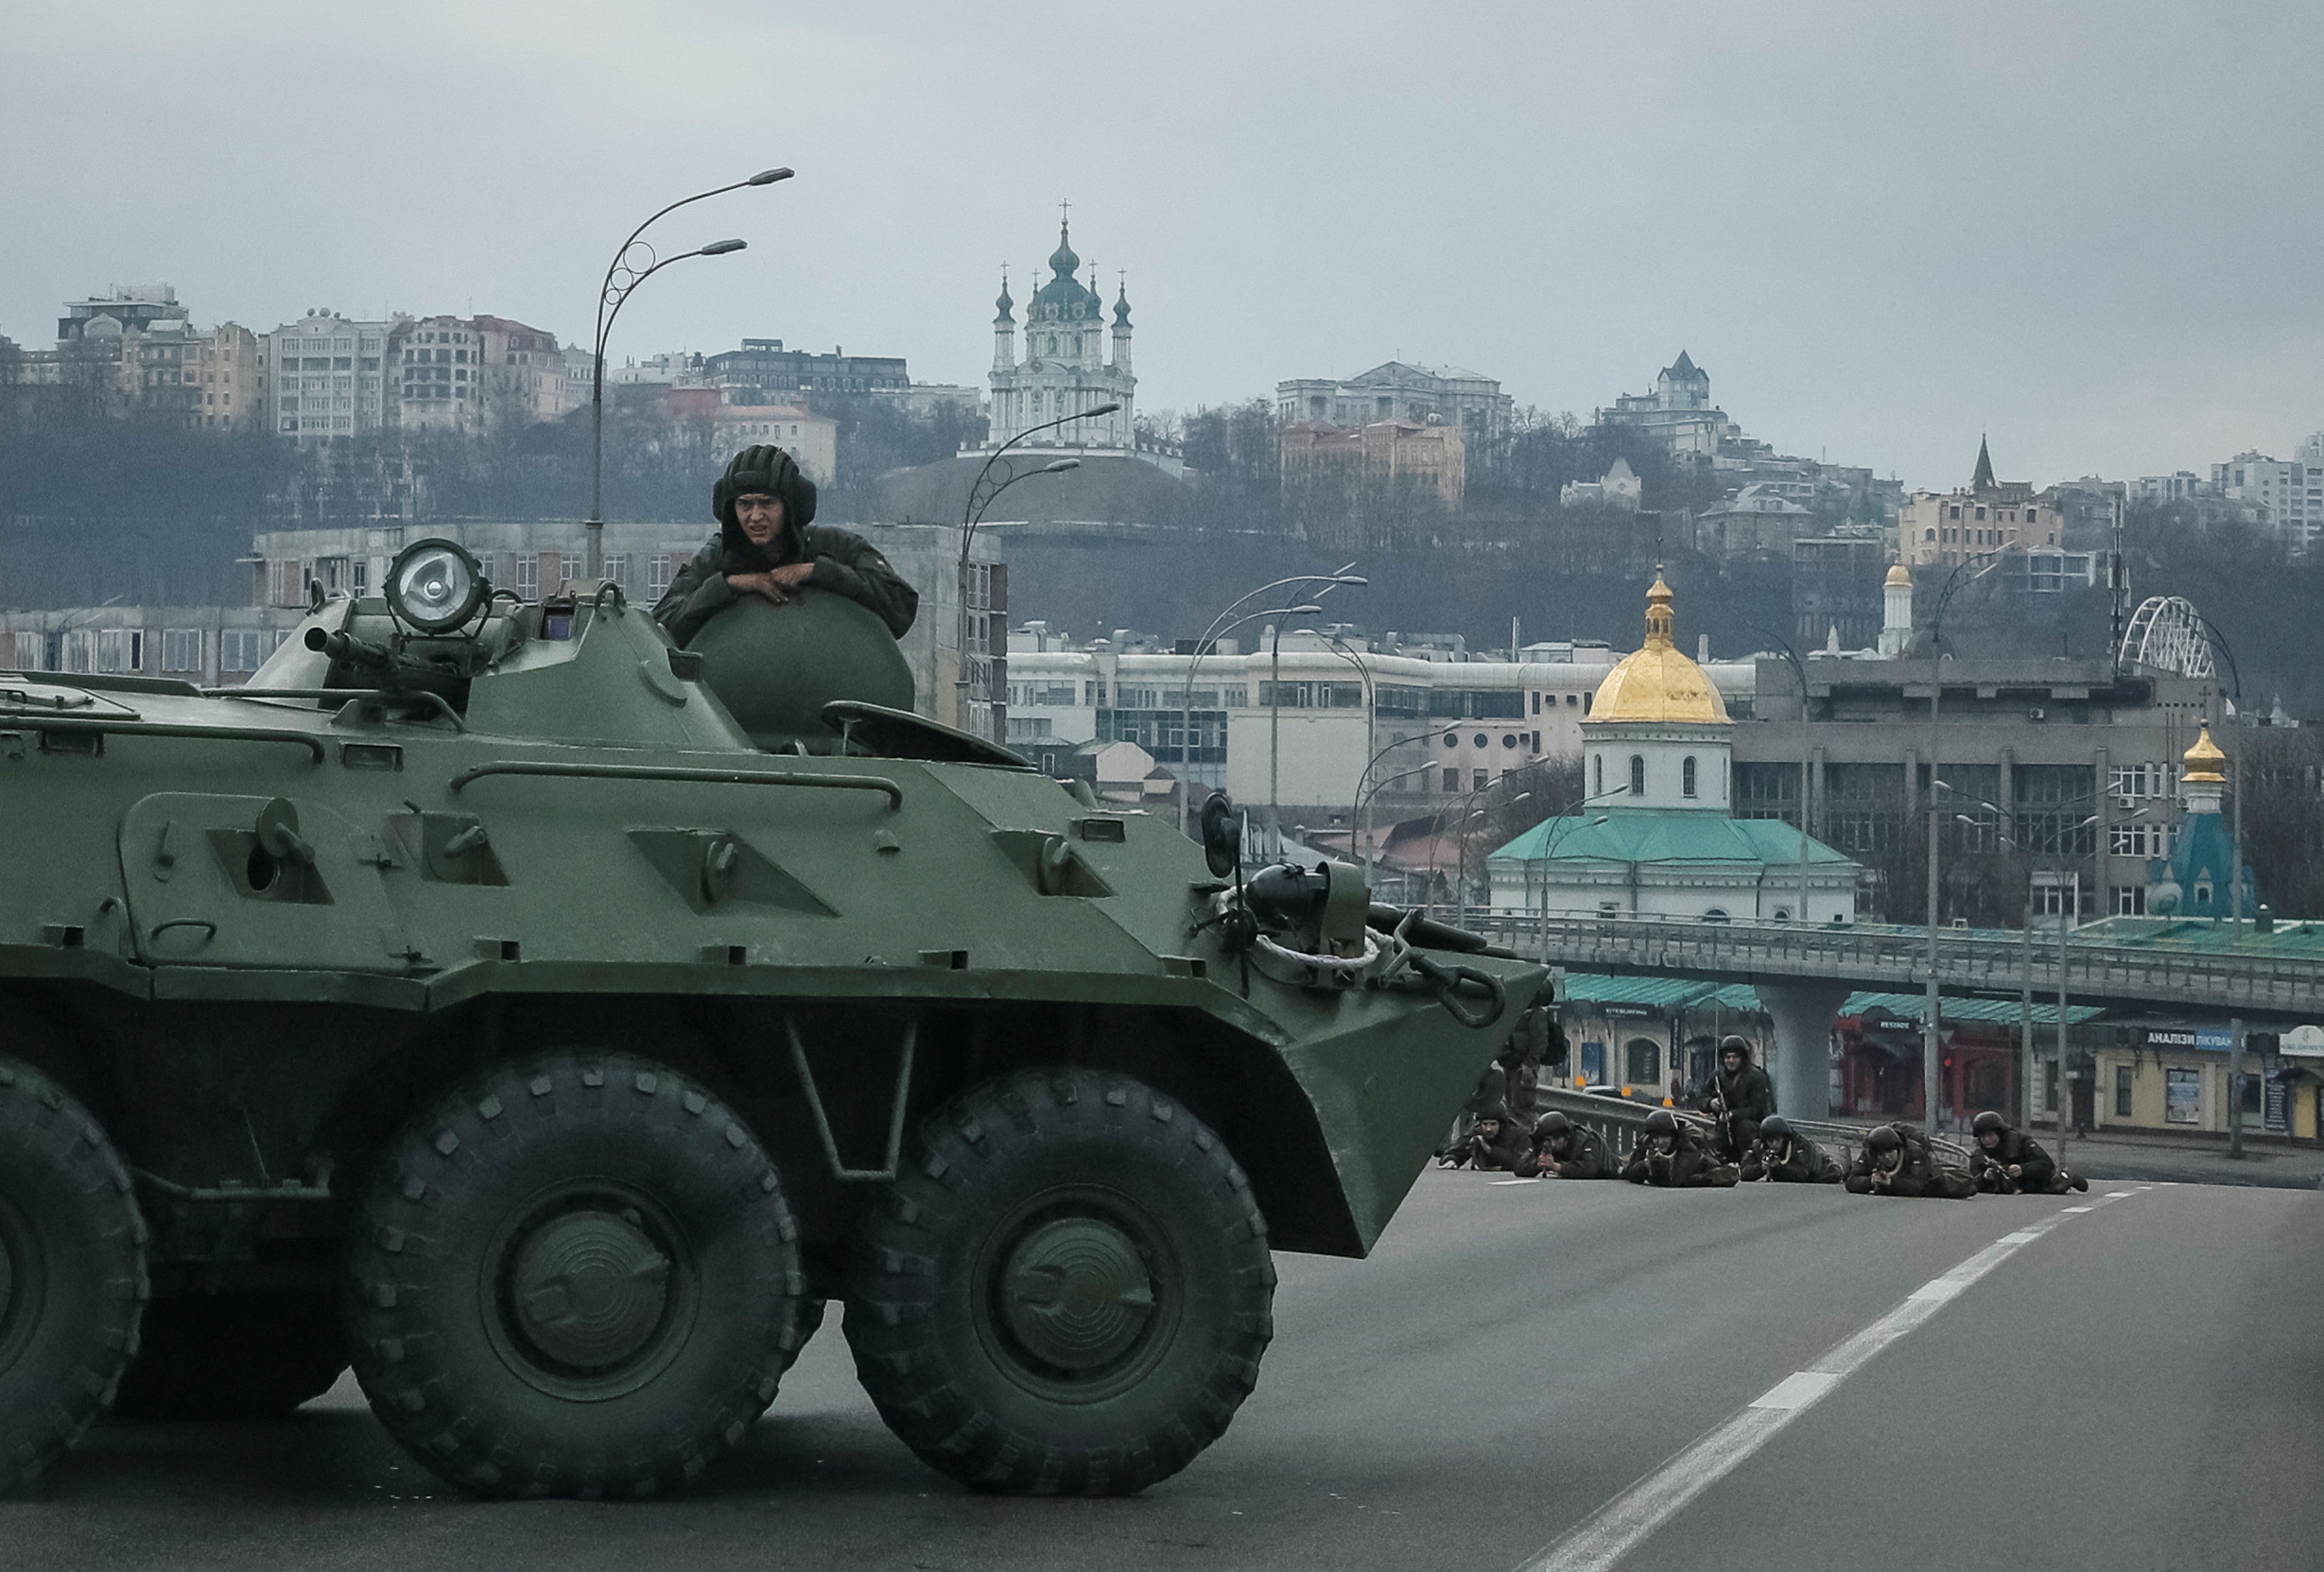 Servicemen of the Ukrainian National Guard take positions in central Kyiv